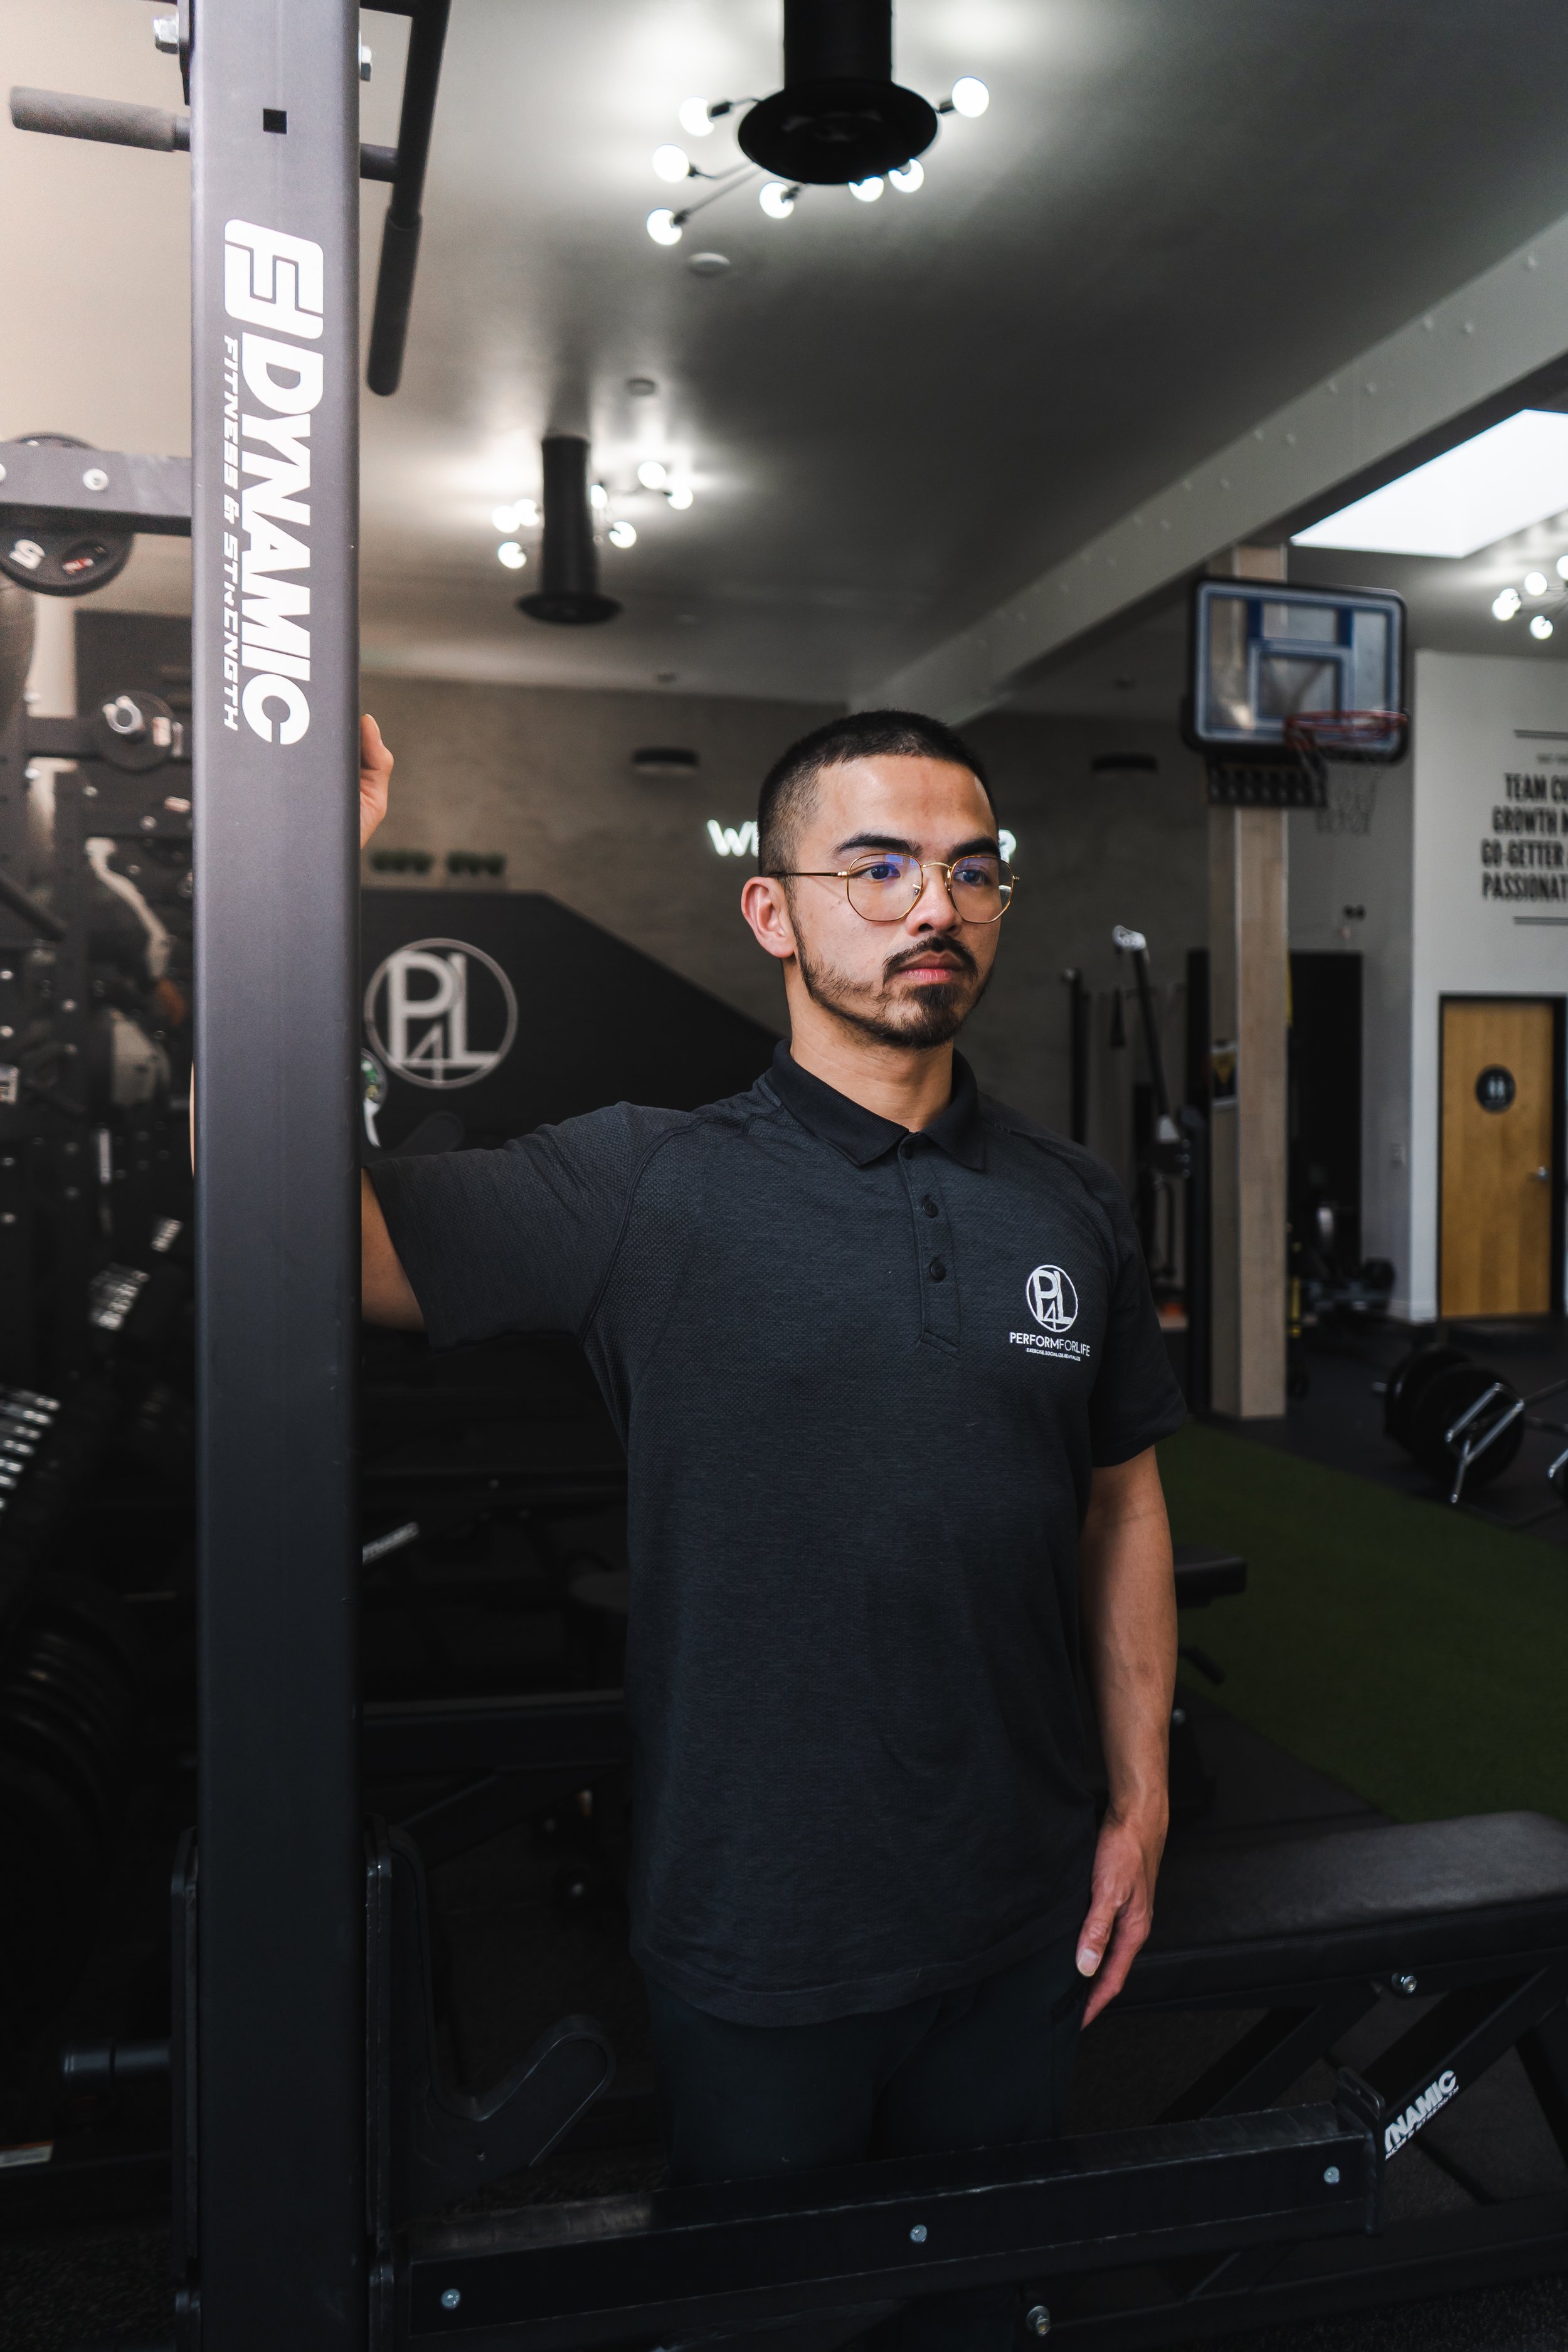 The Pec Doorway Stretch Is Great For Relieving Upper Body Soreness In  Golfers After A Workout. — Personal Fitness Trainers In San Francisco |  Perform For Life